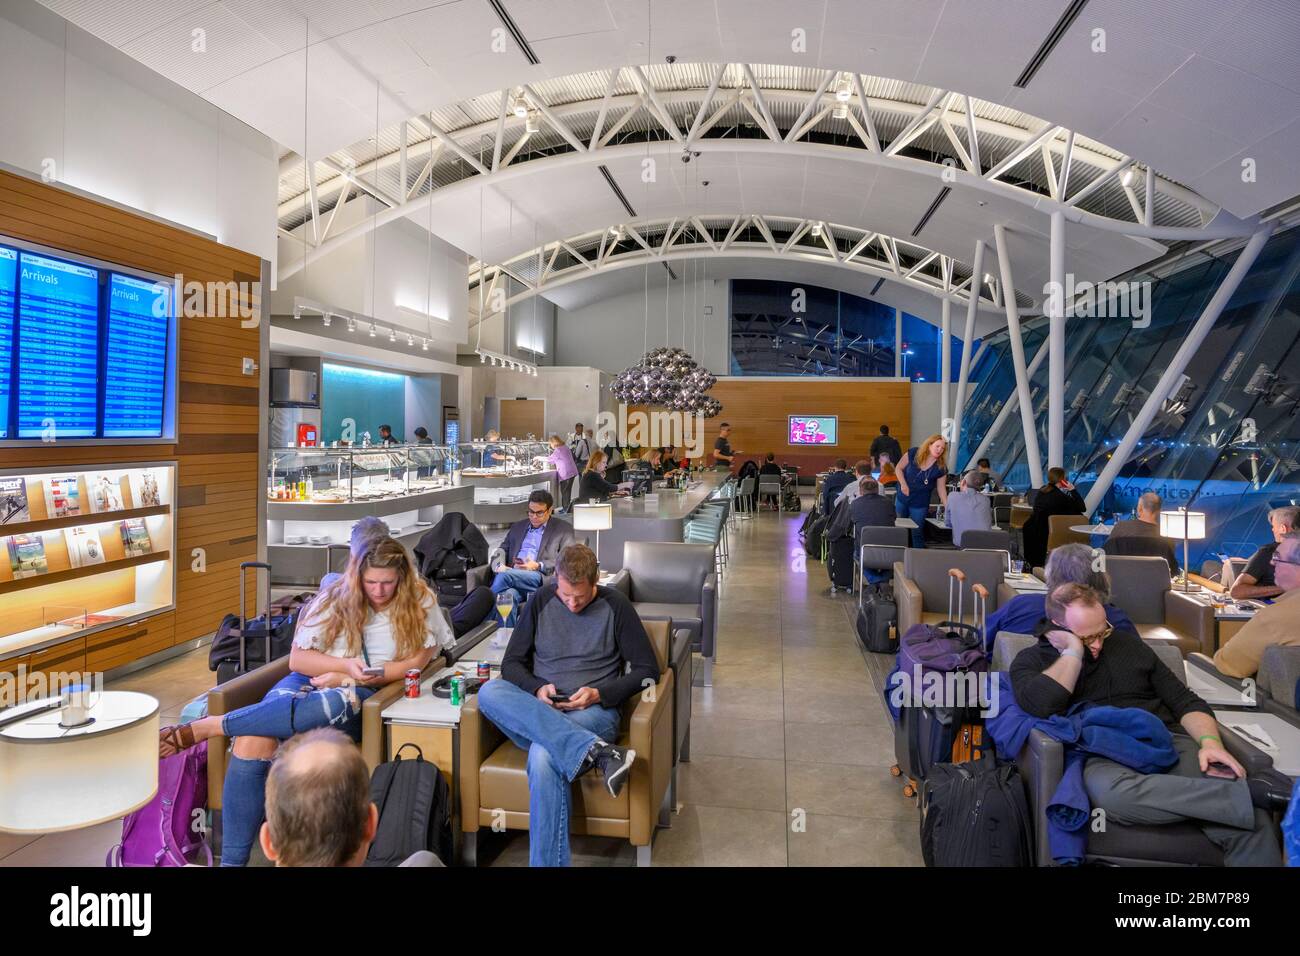 The American Airlines Flagship Lounge at Los Angeles International Airport (LAX), Los Angeles, California, USA Stock Photo